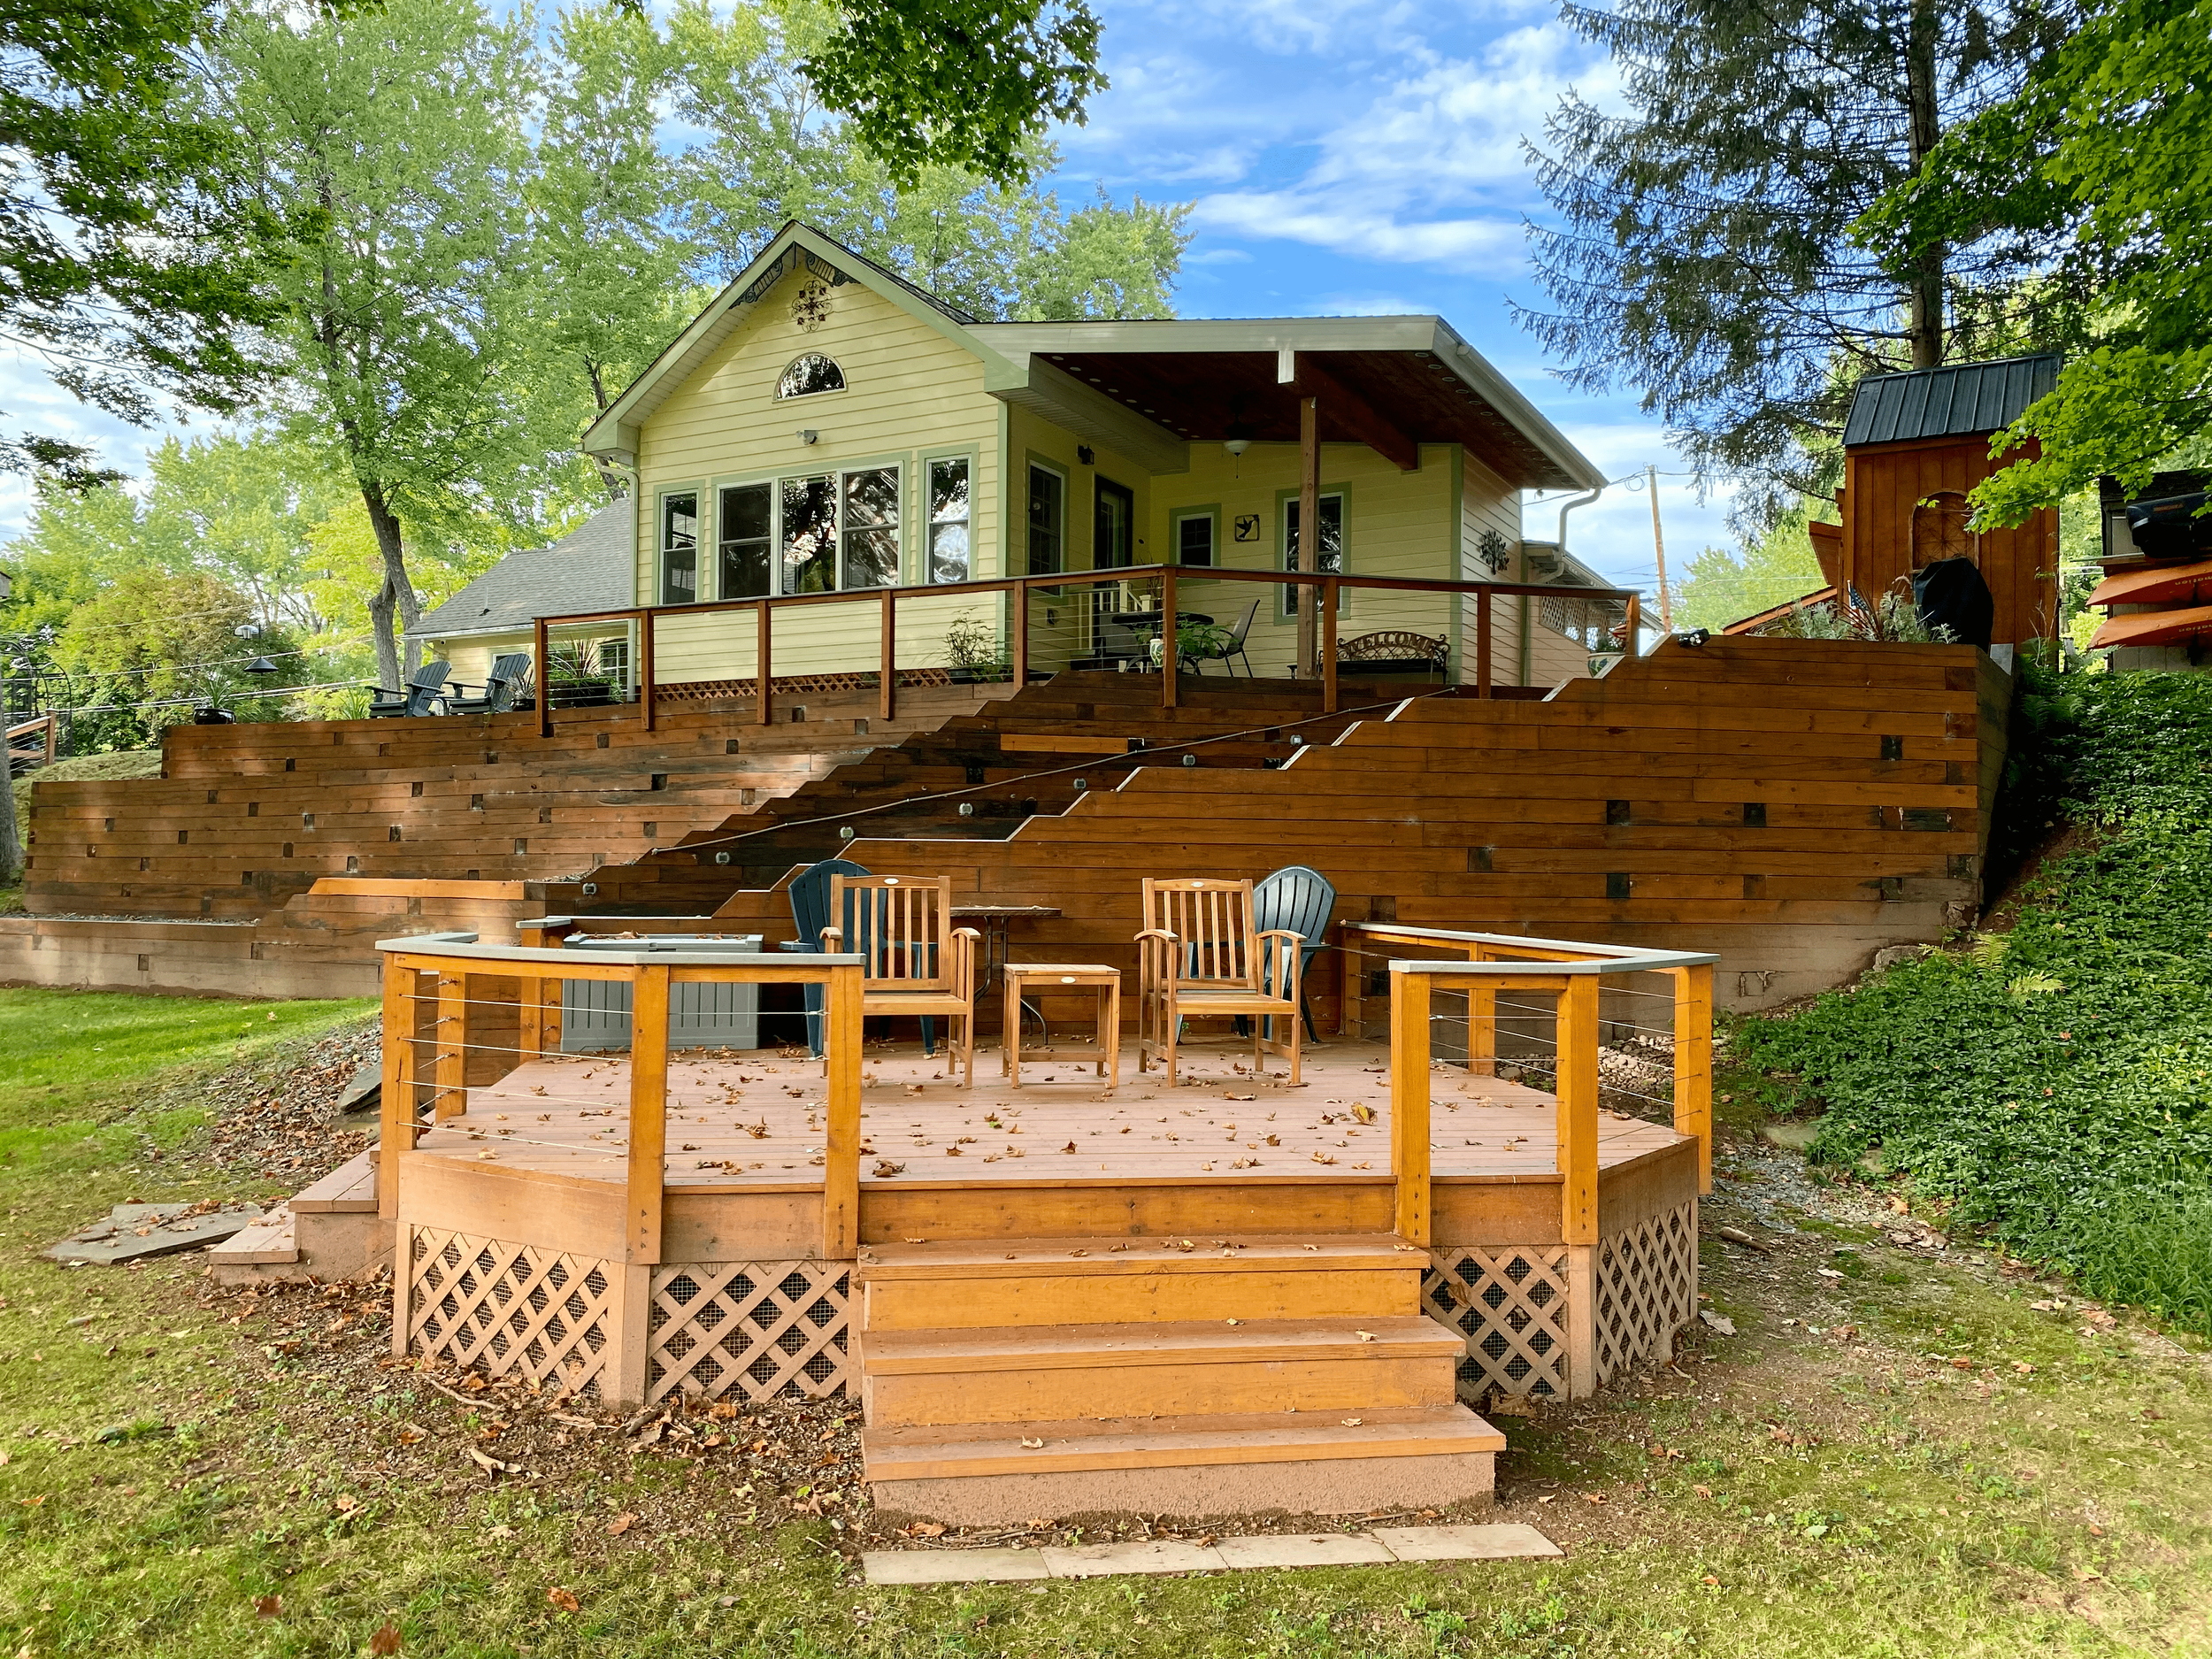 Outdoor Deck_Mission Possible Airbnb_Narrowsburg NY.png